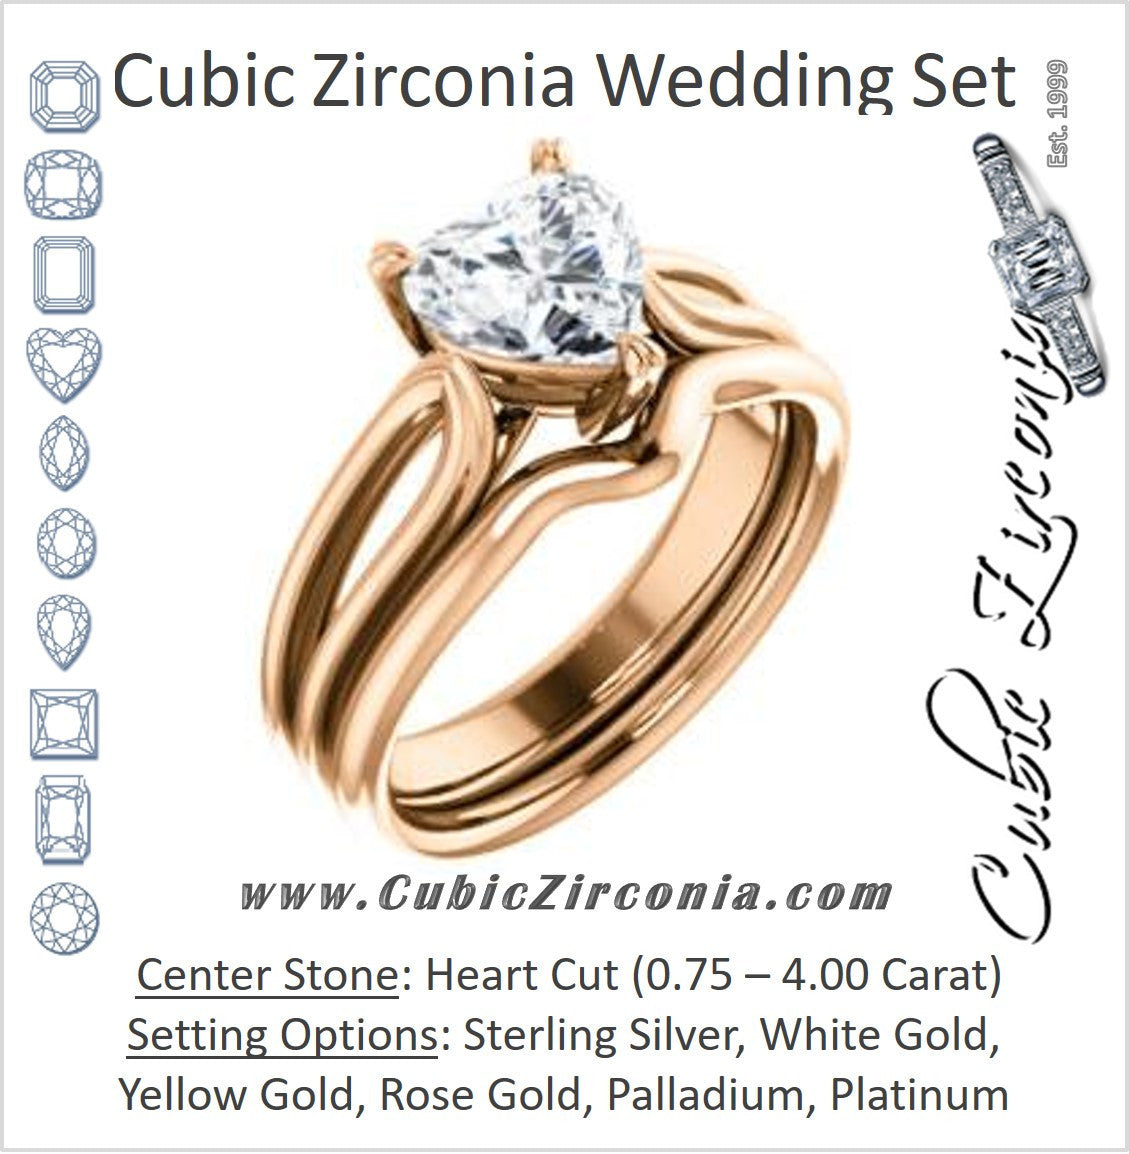 CZ Wedding Set, featuring The Piper engagement ring (Customizable Heart Cut Solitaire with Flared Split-band)